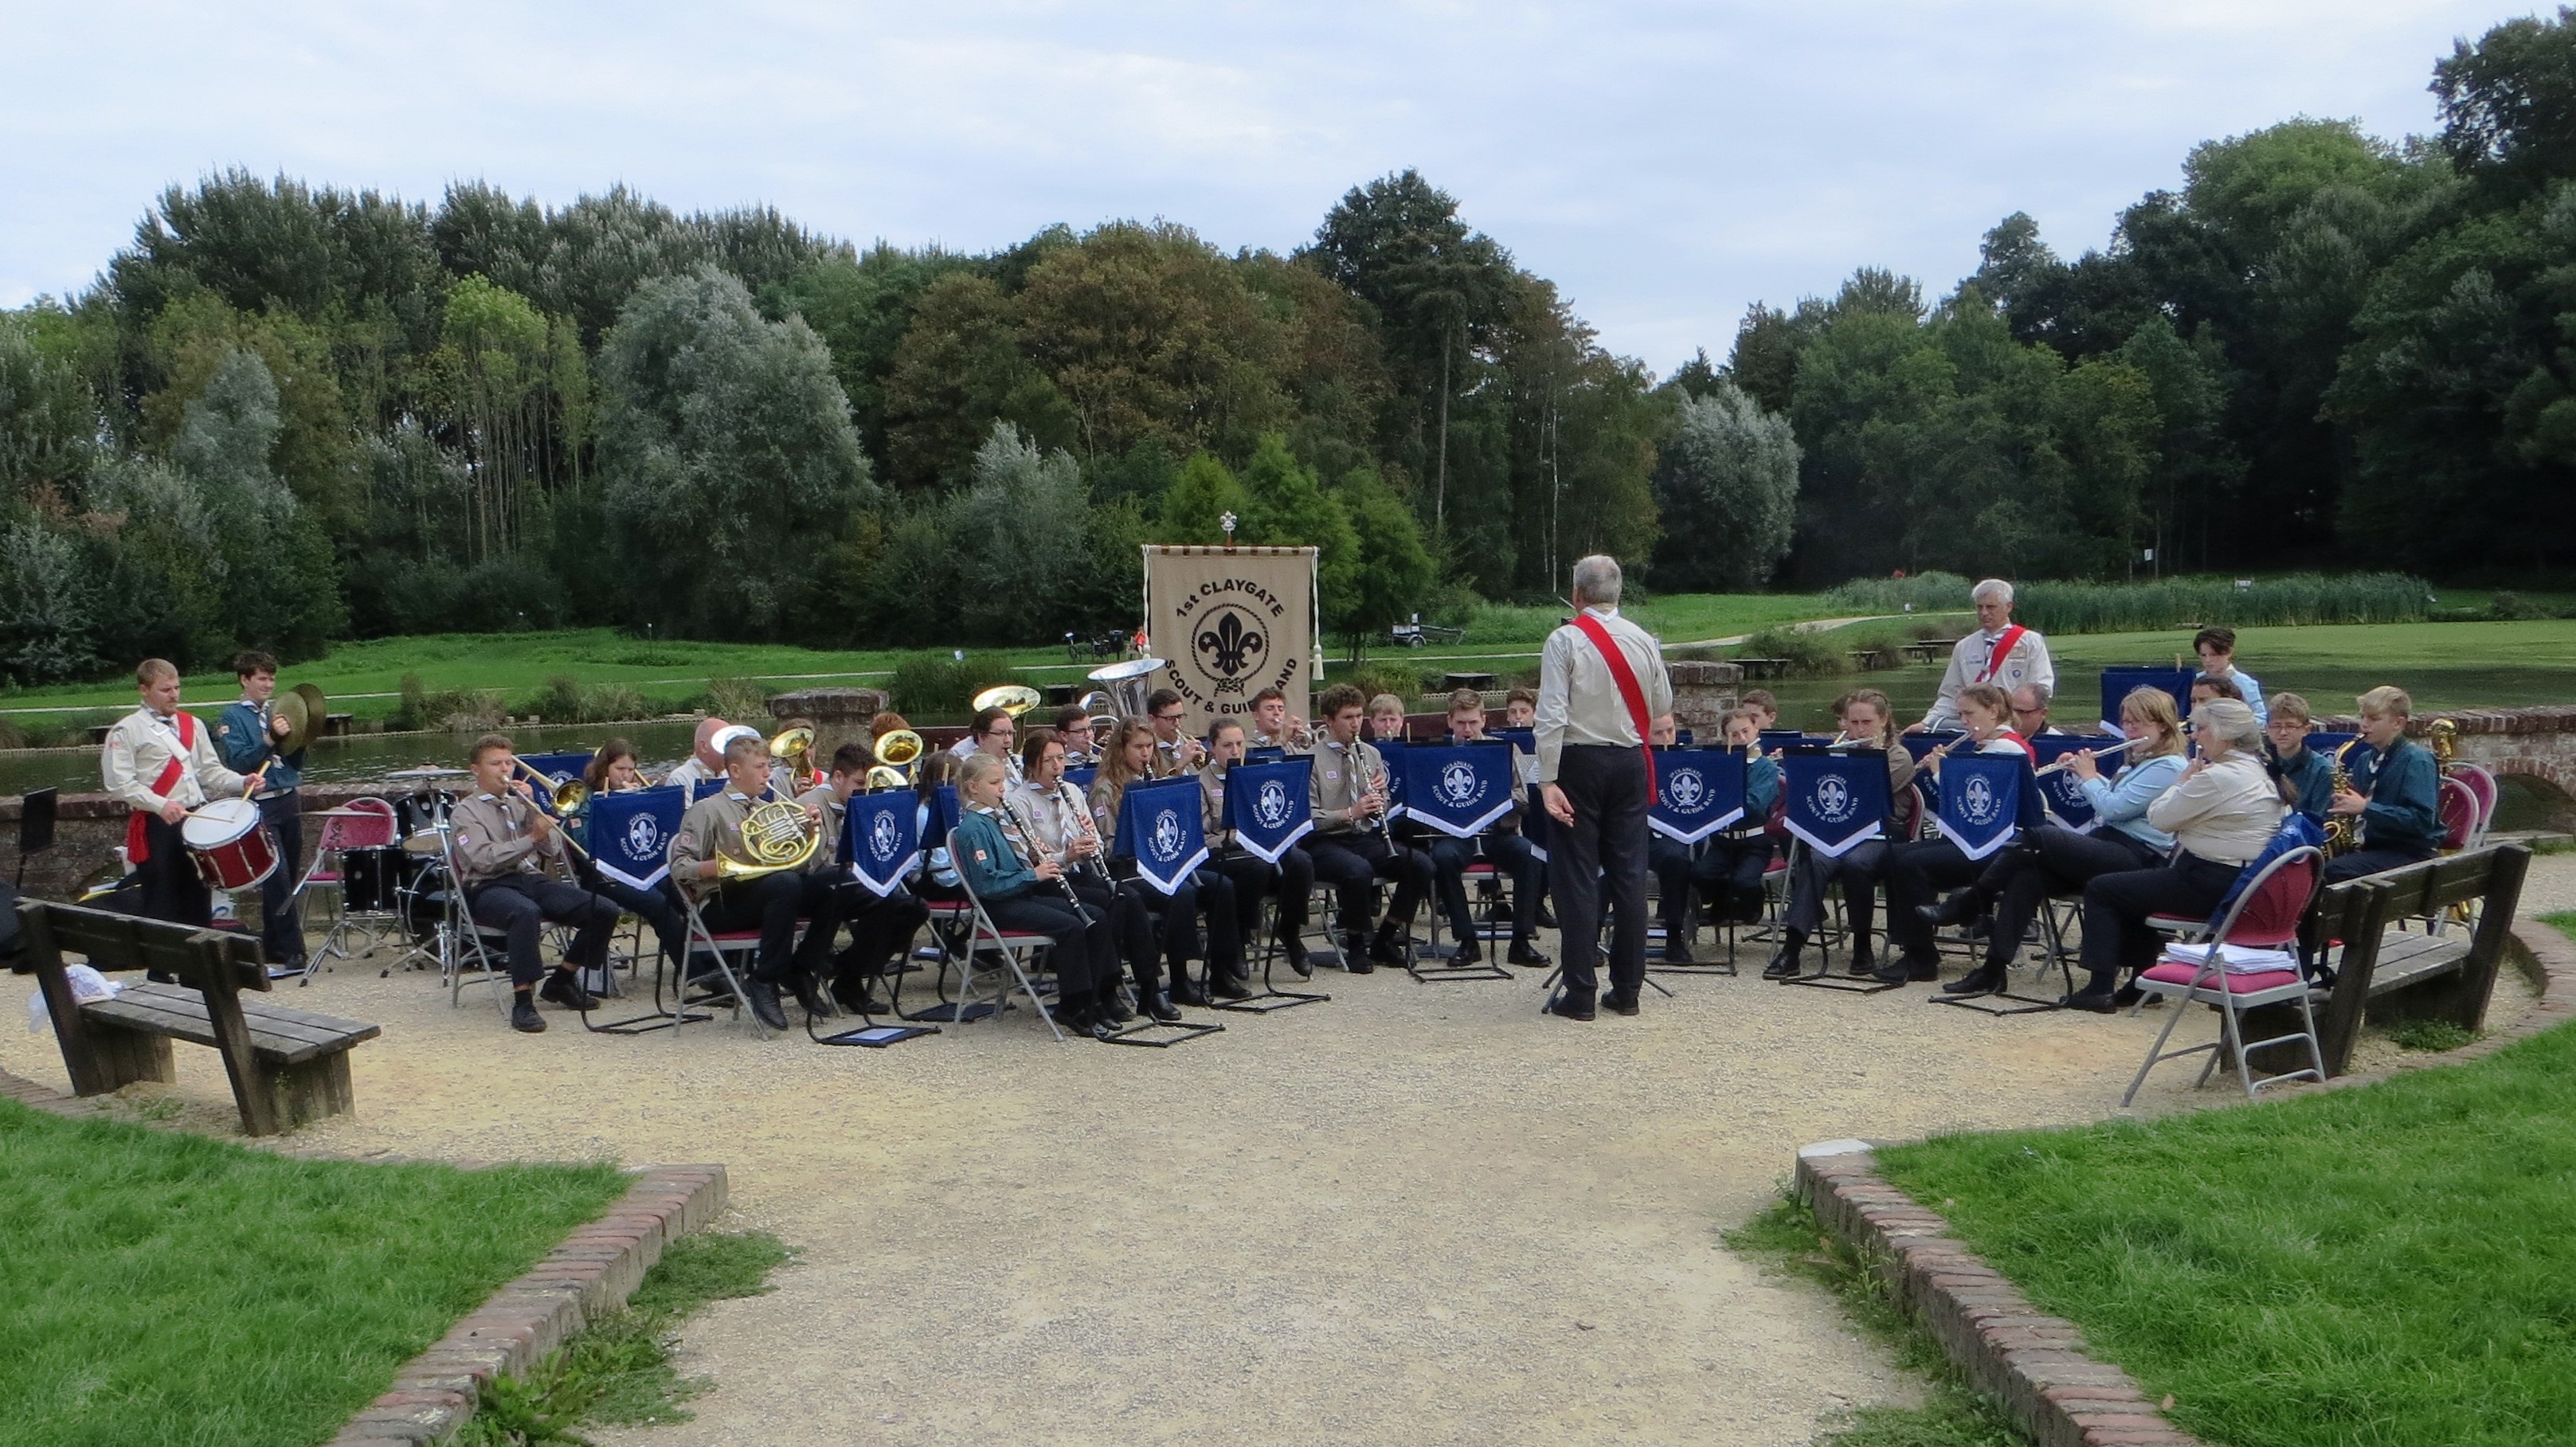 1st Claygate Scout & Guide Band